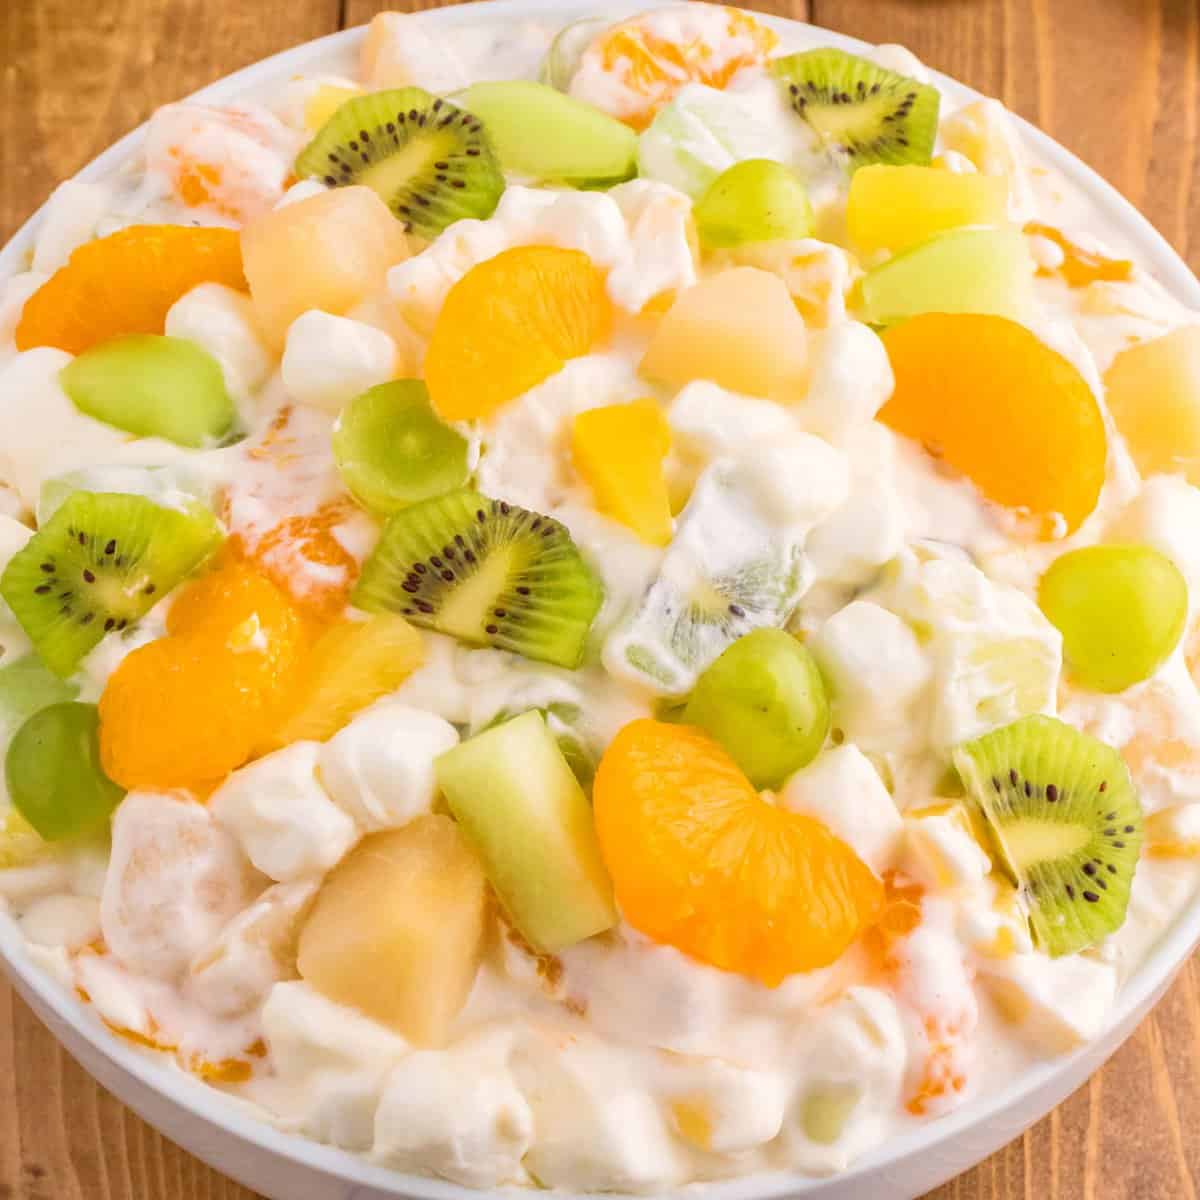 A bowl of ambrosia salad with green and orange or gold ingredients.